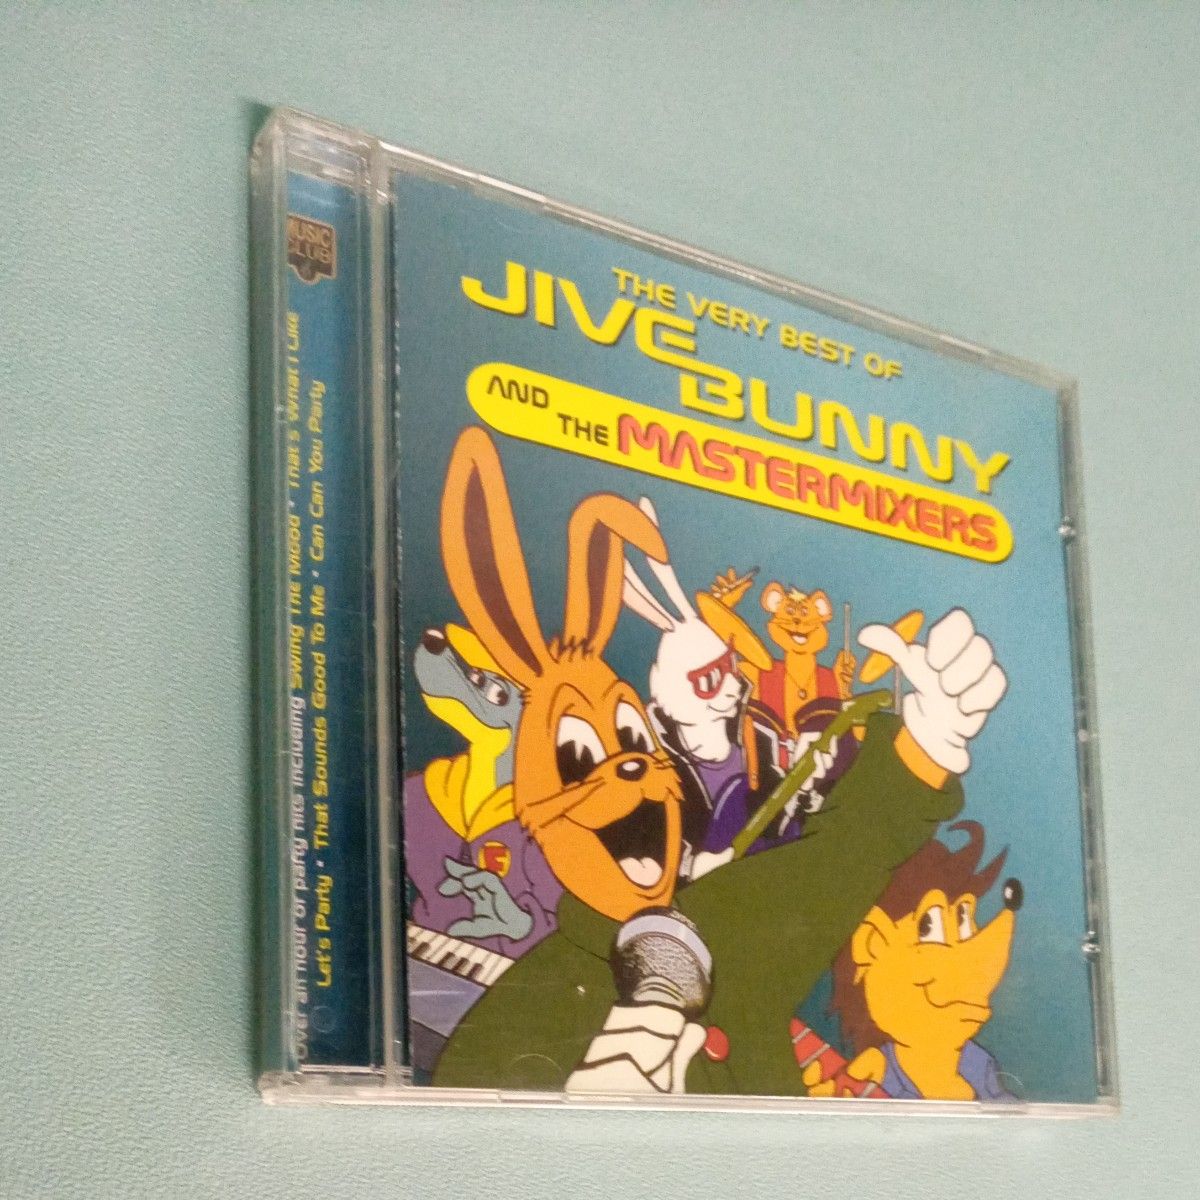 THE VERY BEST OF JIVE BUNNY & THE  MASTERMIXERS    CD全13曲　オールディーズ